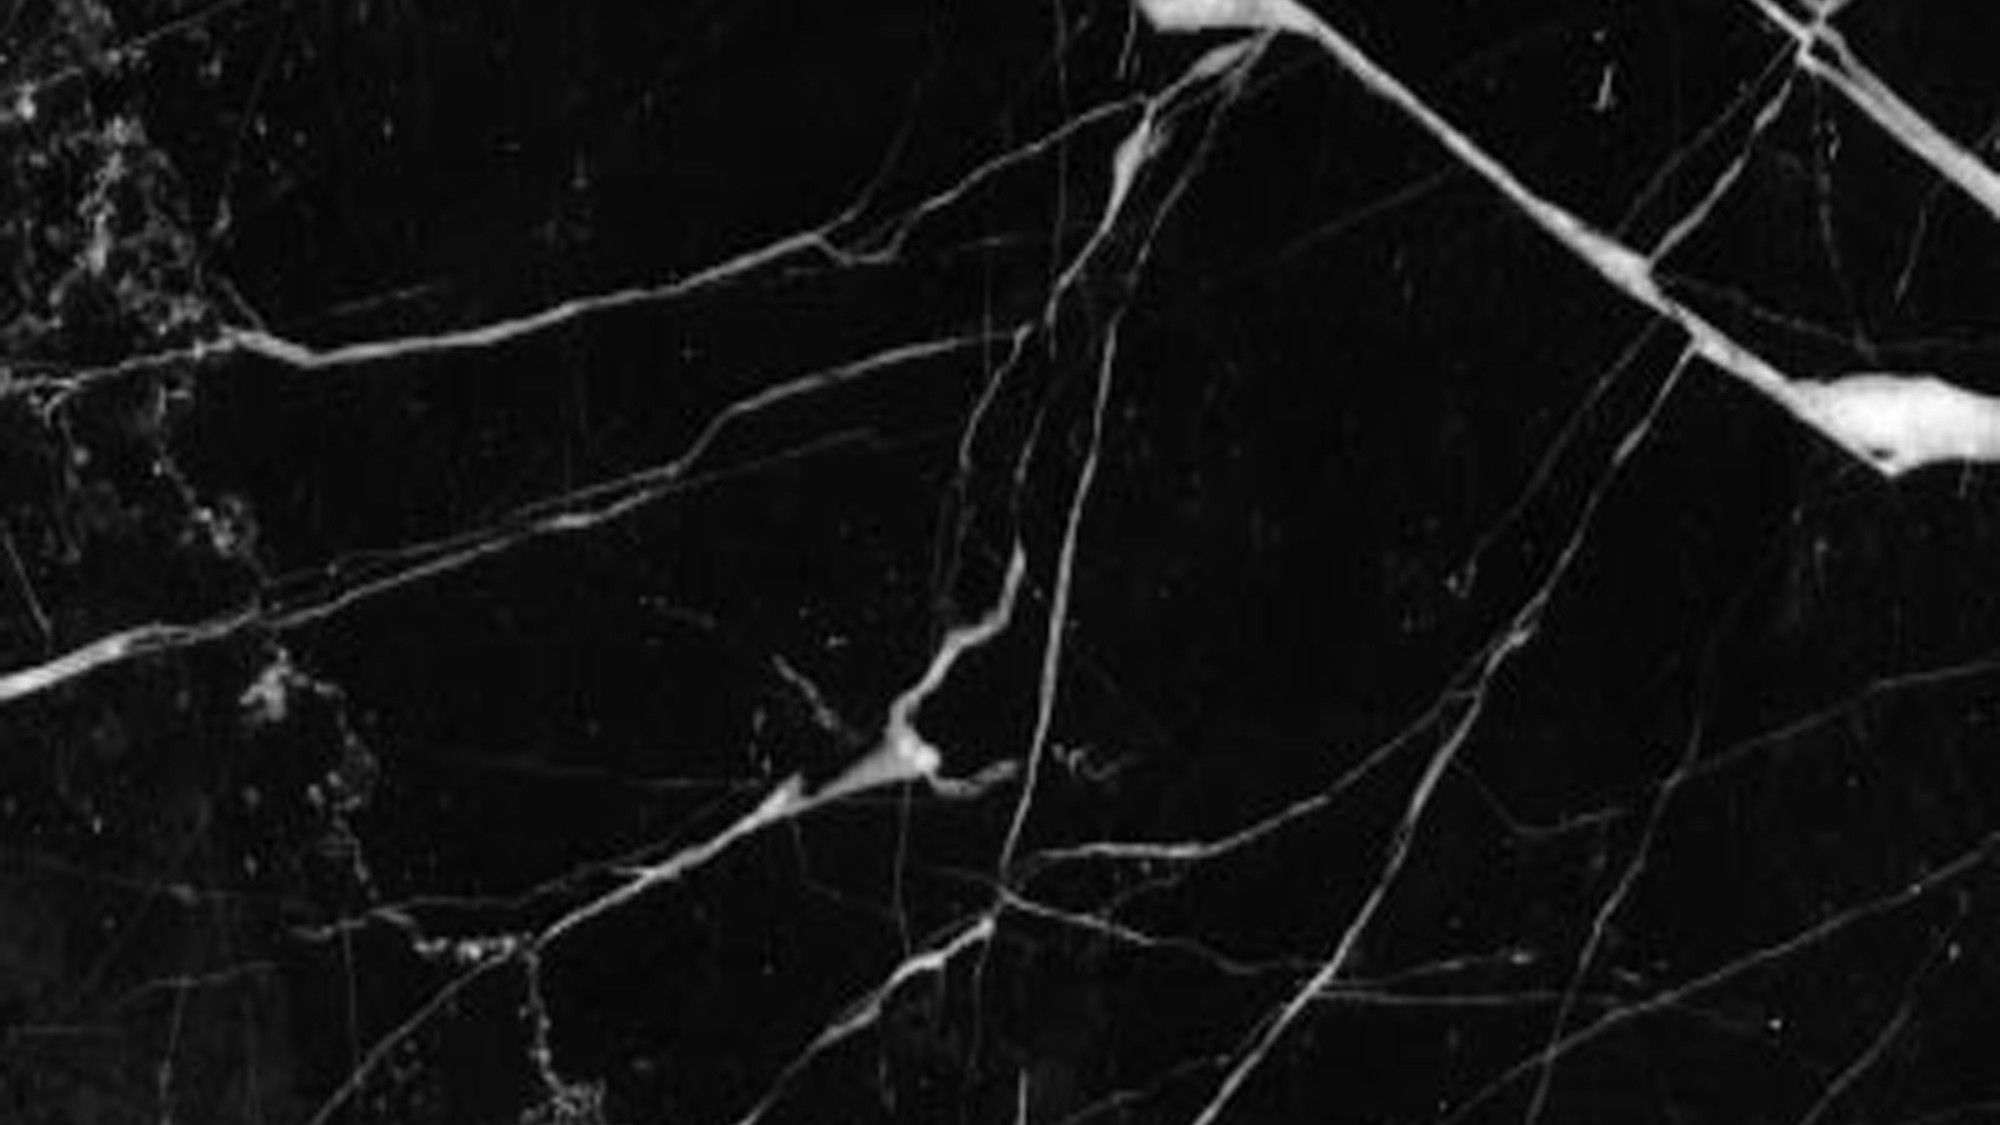 best marble wallpaper 2000x1125 for samsung galaxy. Marble desktop wallpaper, Marble wallpaper hd, Marble wallpaper